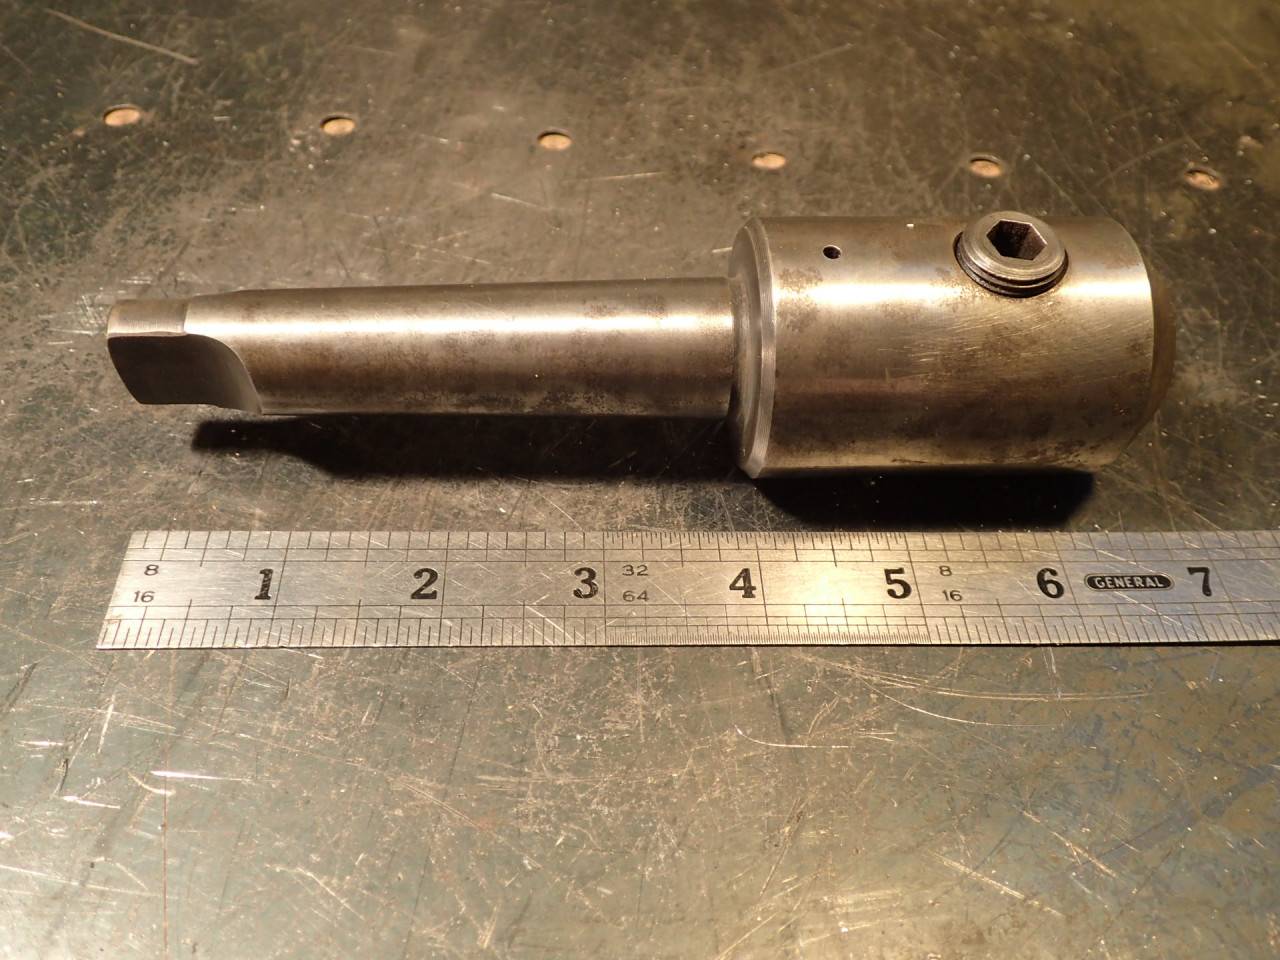 Buy 3/4" End Mill Tool Holder: Morse Taper #3 Shank (MT3 3MT) Used in Good  Condition Lot #1912.092 on the Aucto Marketplace